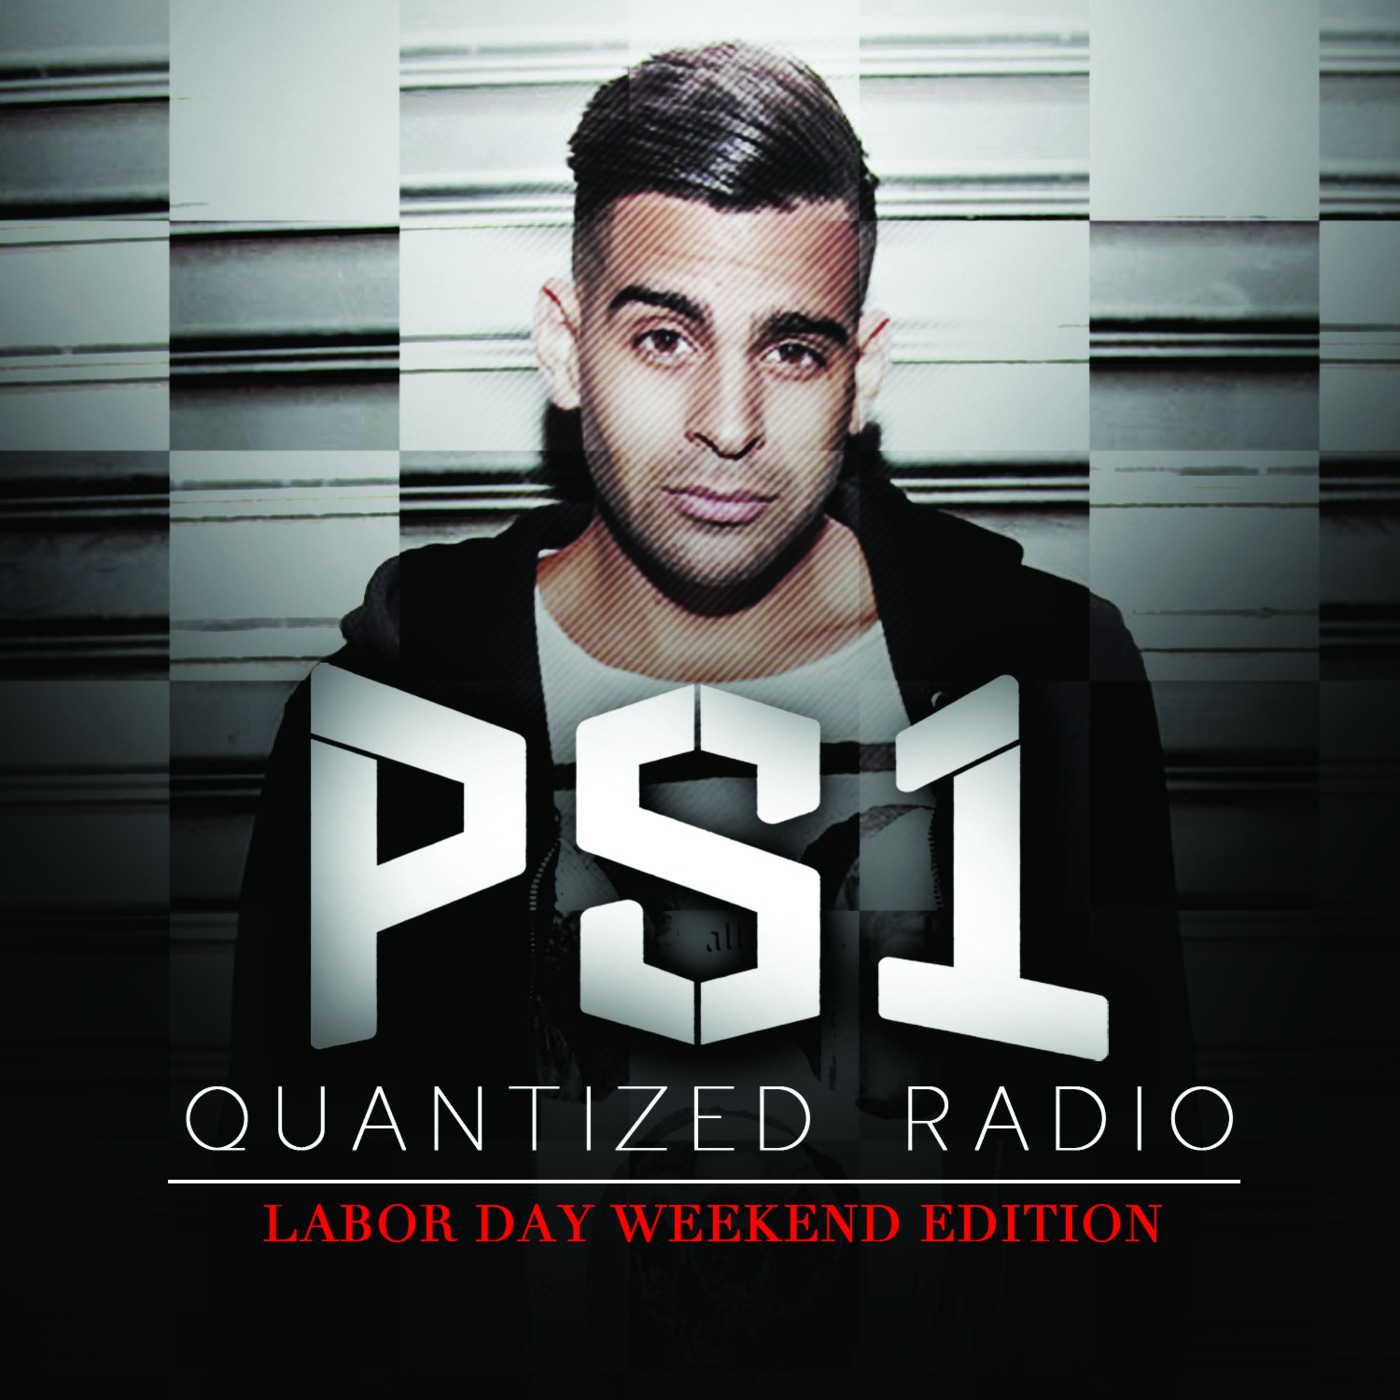 PS1 - Returns With A Special Edition of Quantized Radio Labor Day Edition